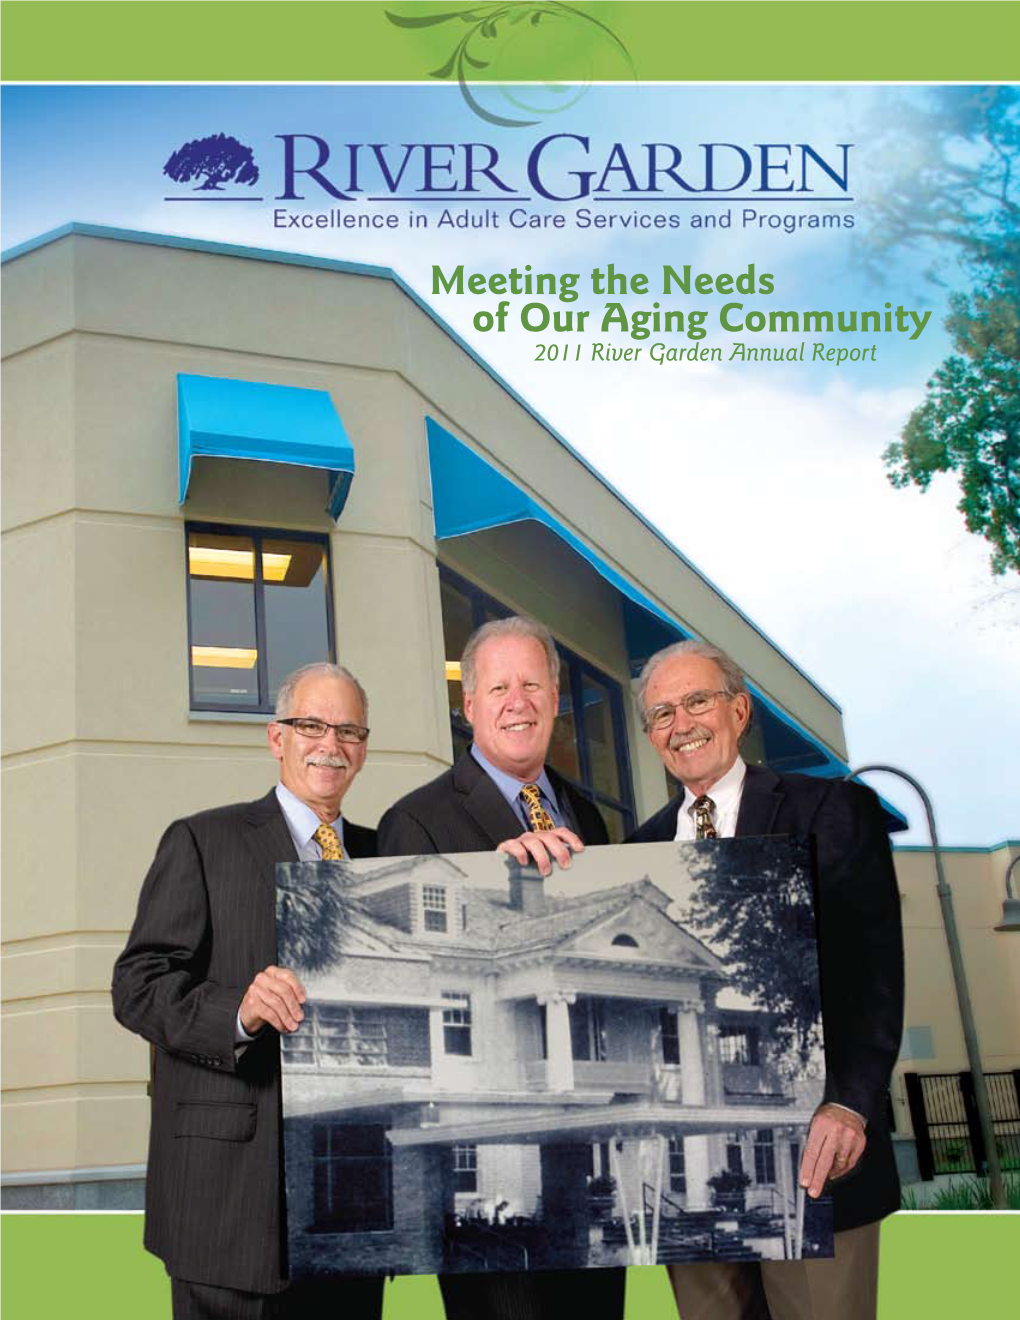 Meeting the Needs of Our Aging Community 2011 River Garden Annual Report RGF324-Version EMPTY Layout 1 1/30/12 12:45 PM Page 2